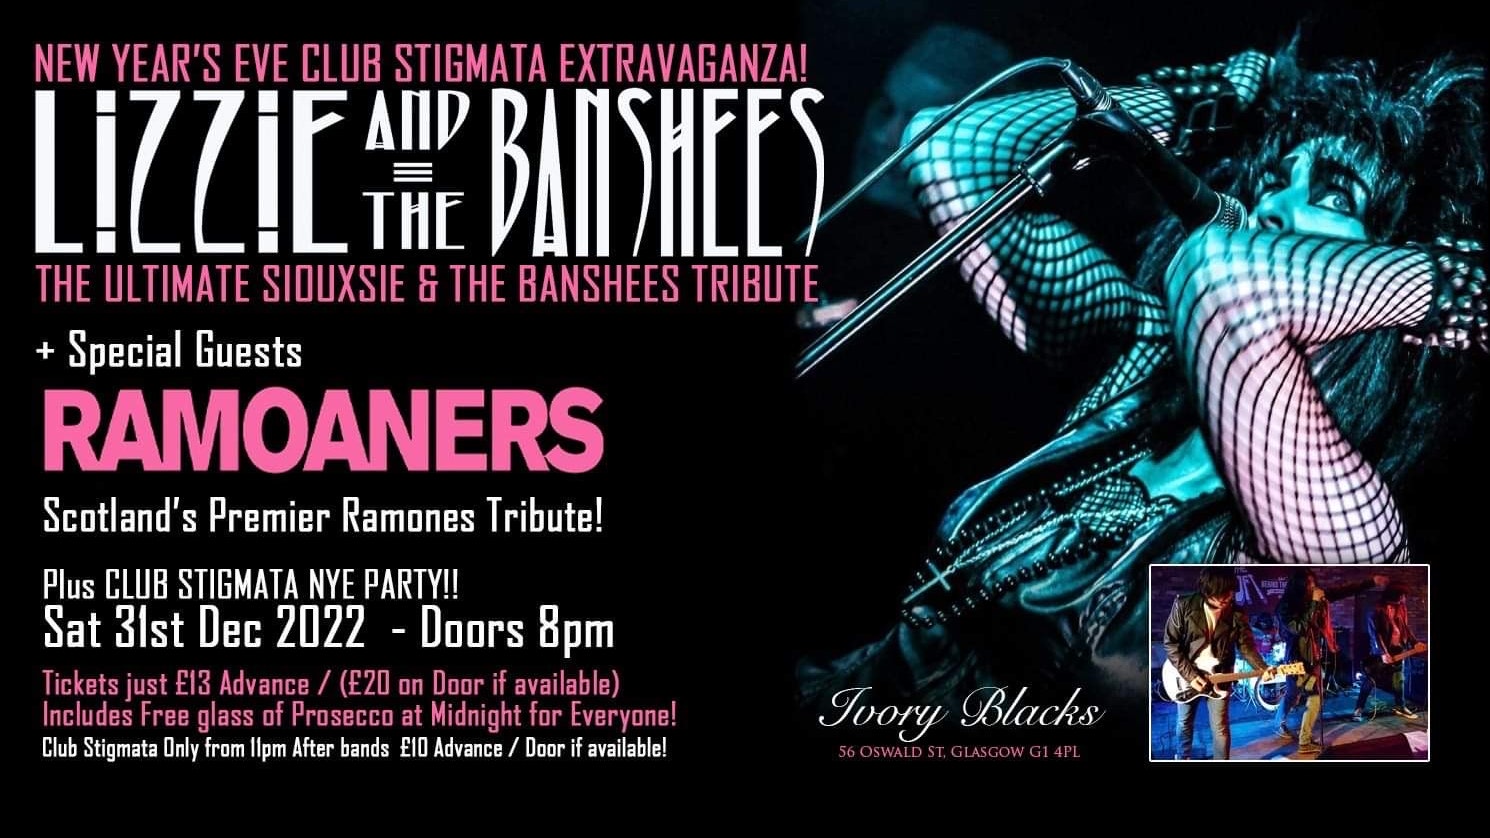 NEW YEAR’S EVE Club Stigmata Extravaganza with LIZZIE & THE BANSHEES + RAMOANERS Live!